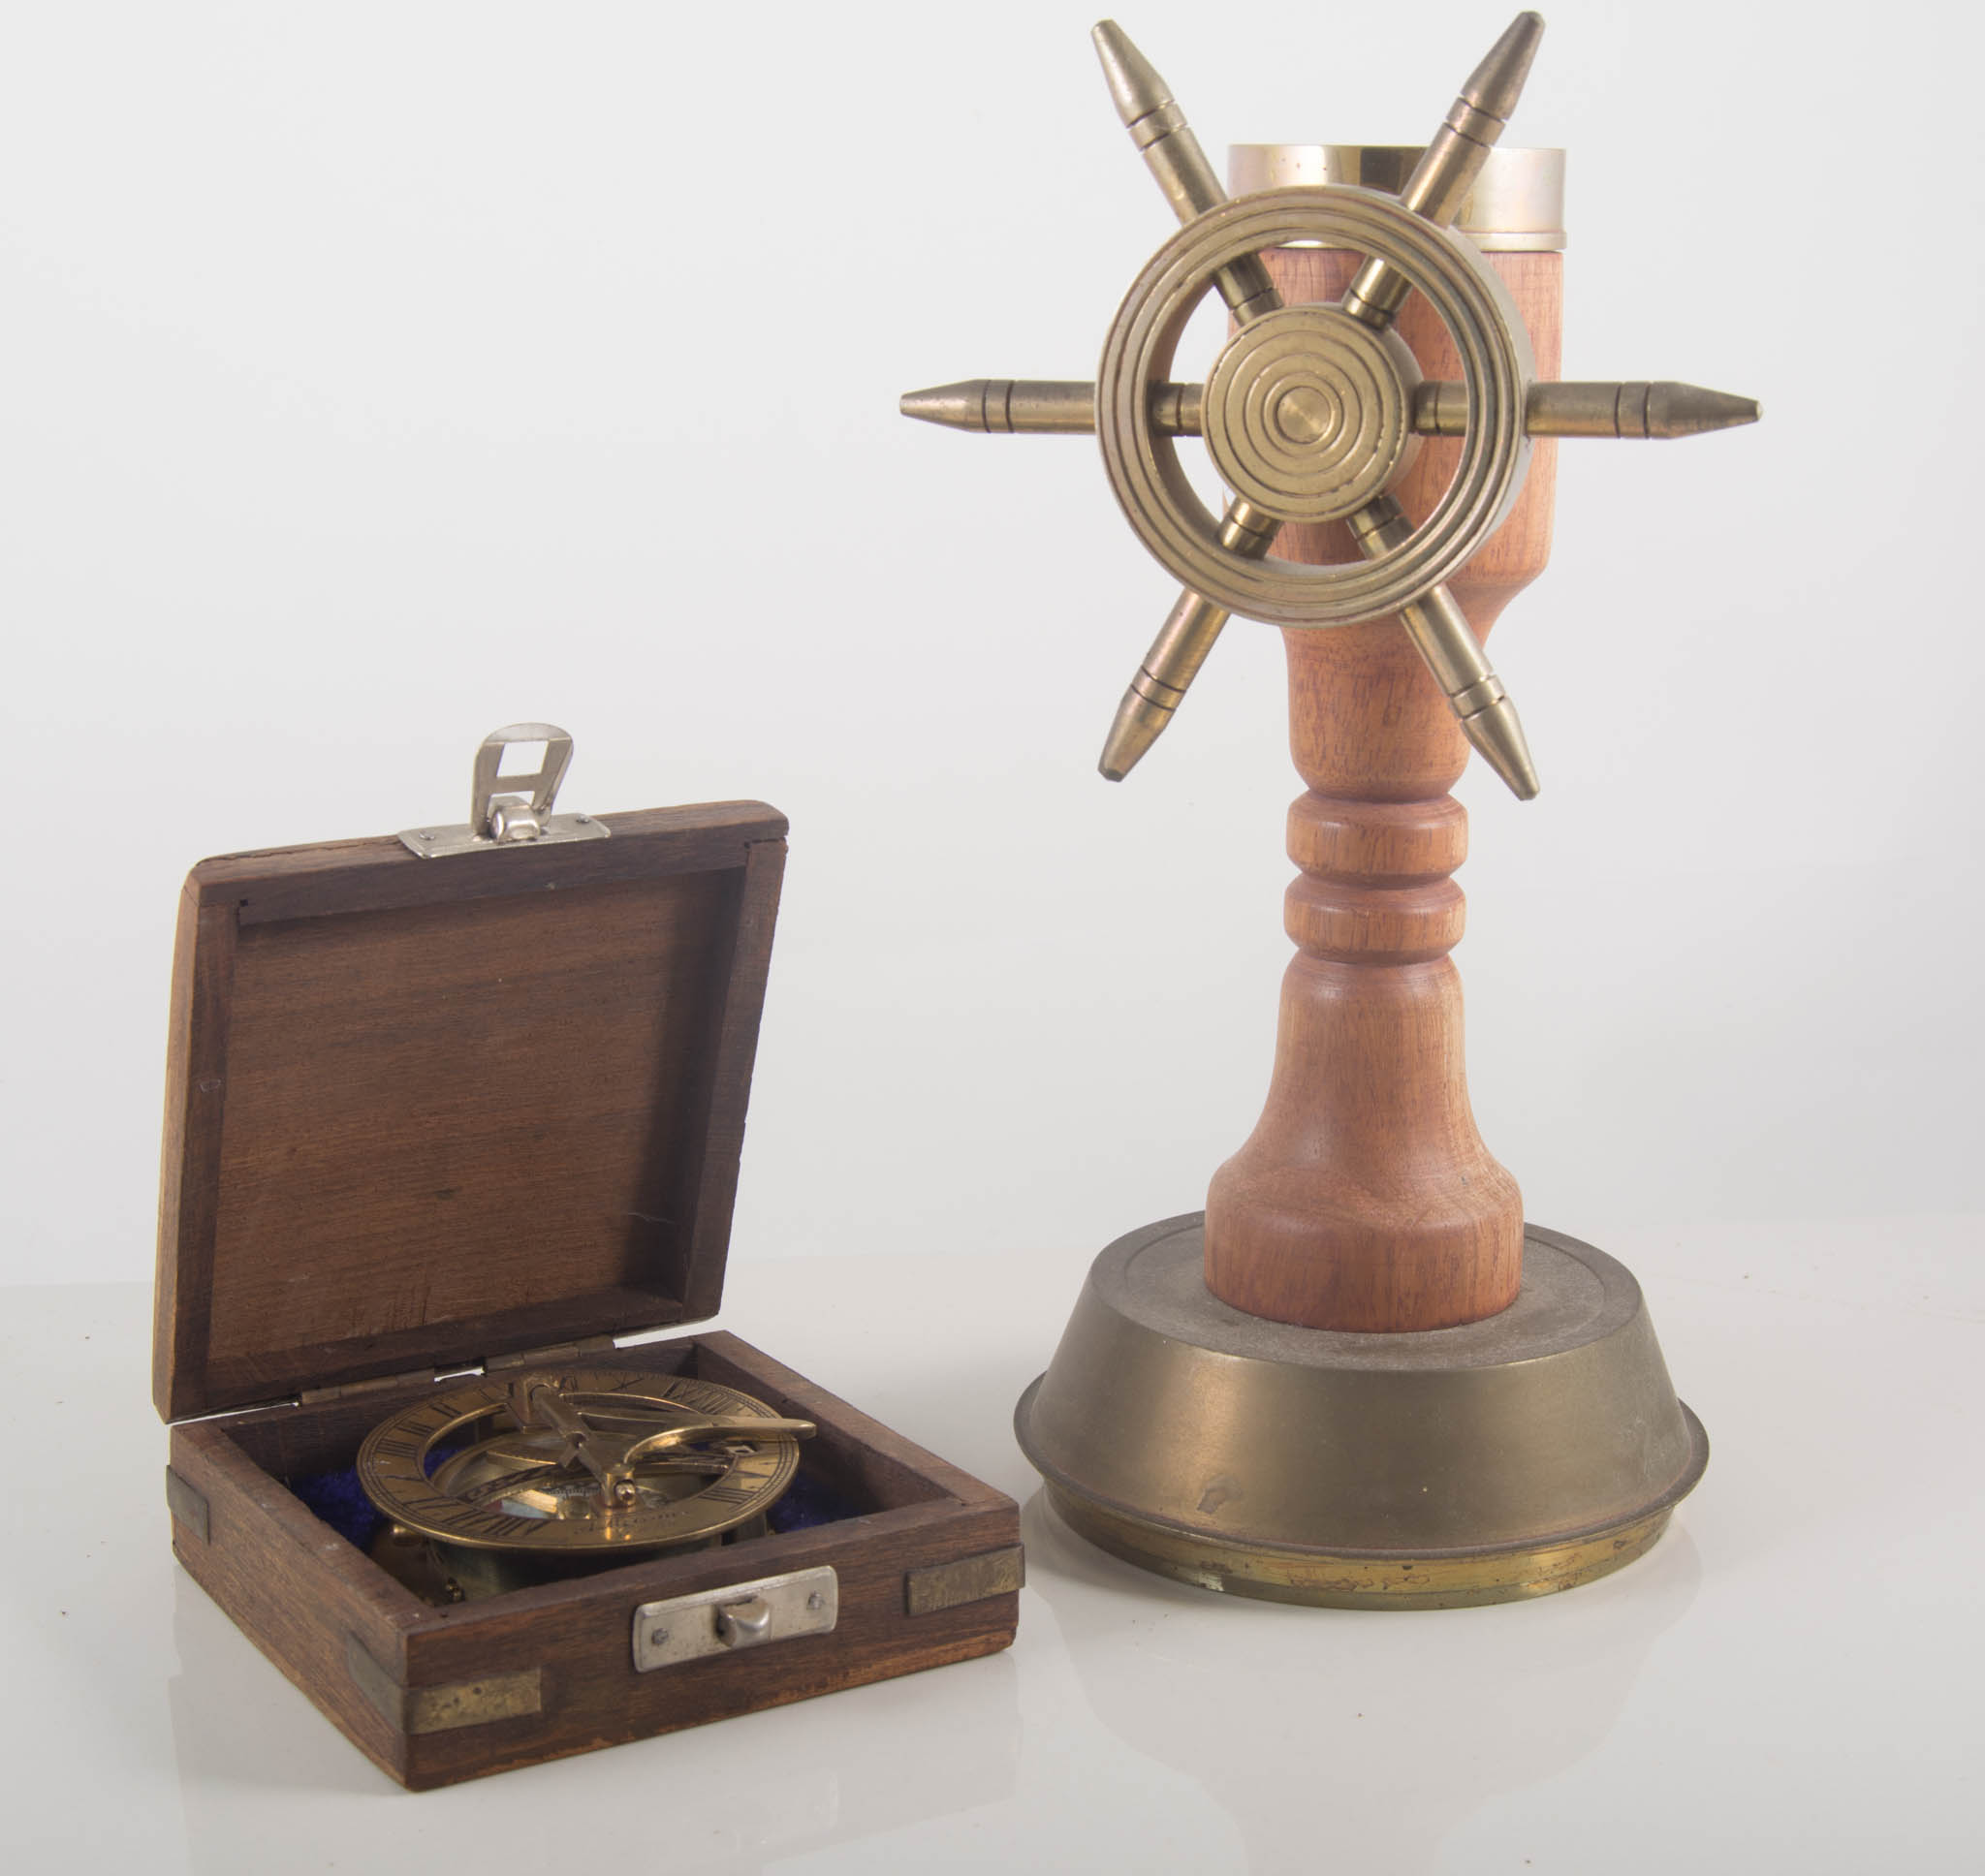 Re-cast brass sextant, another boxed compass, table compass, gimballed led compass.